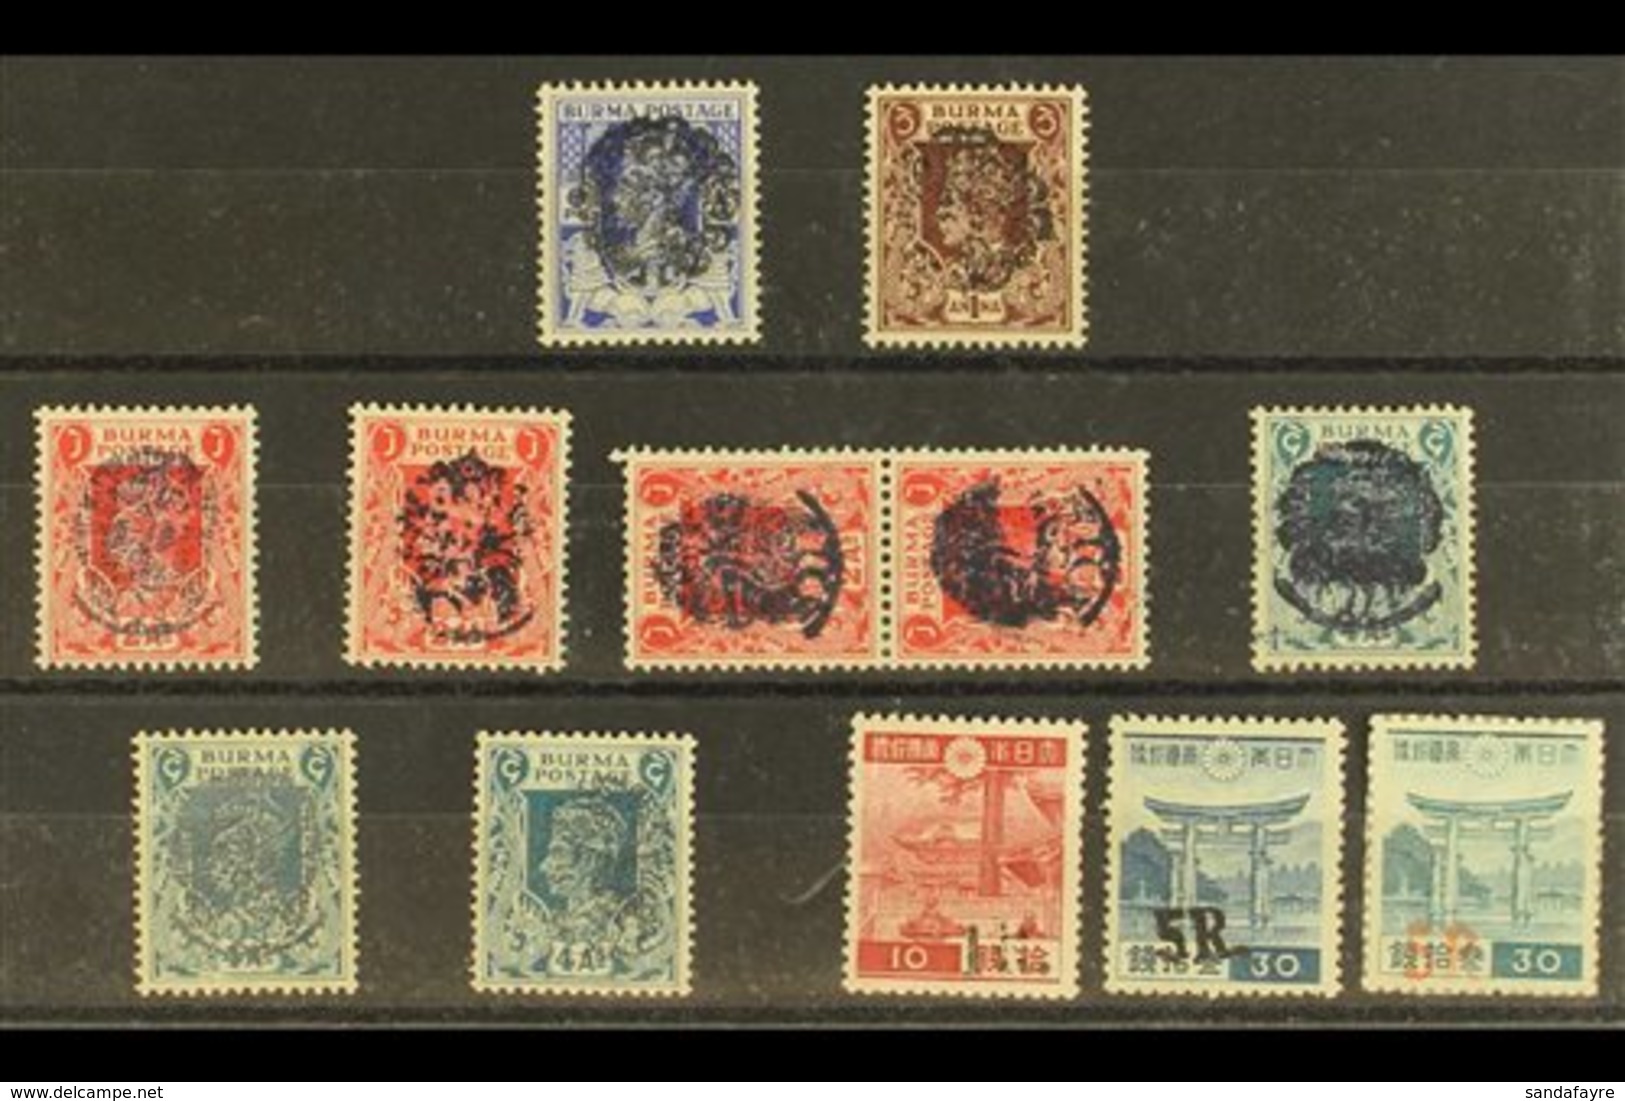 1942 Japanese Occupation Overprints / Surcharges, A Small Mint Selection From The Alan Meech Collection Including Milo R - Burma (...-1947)